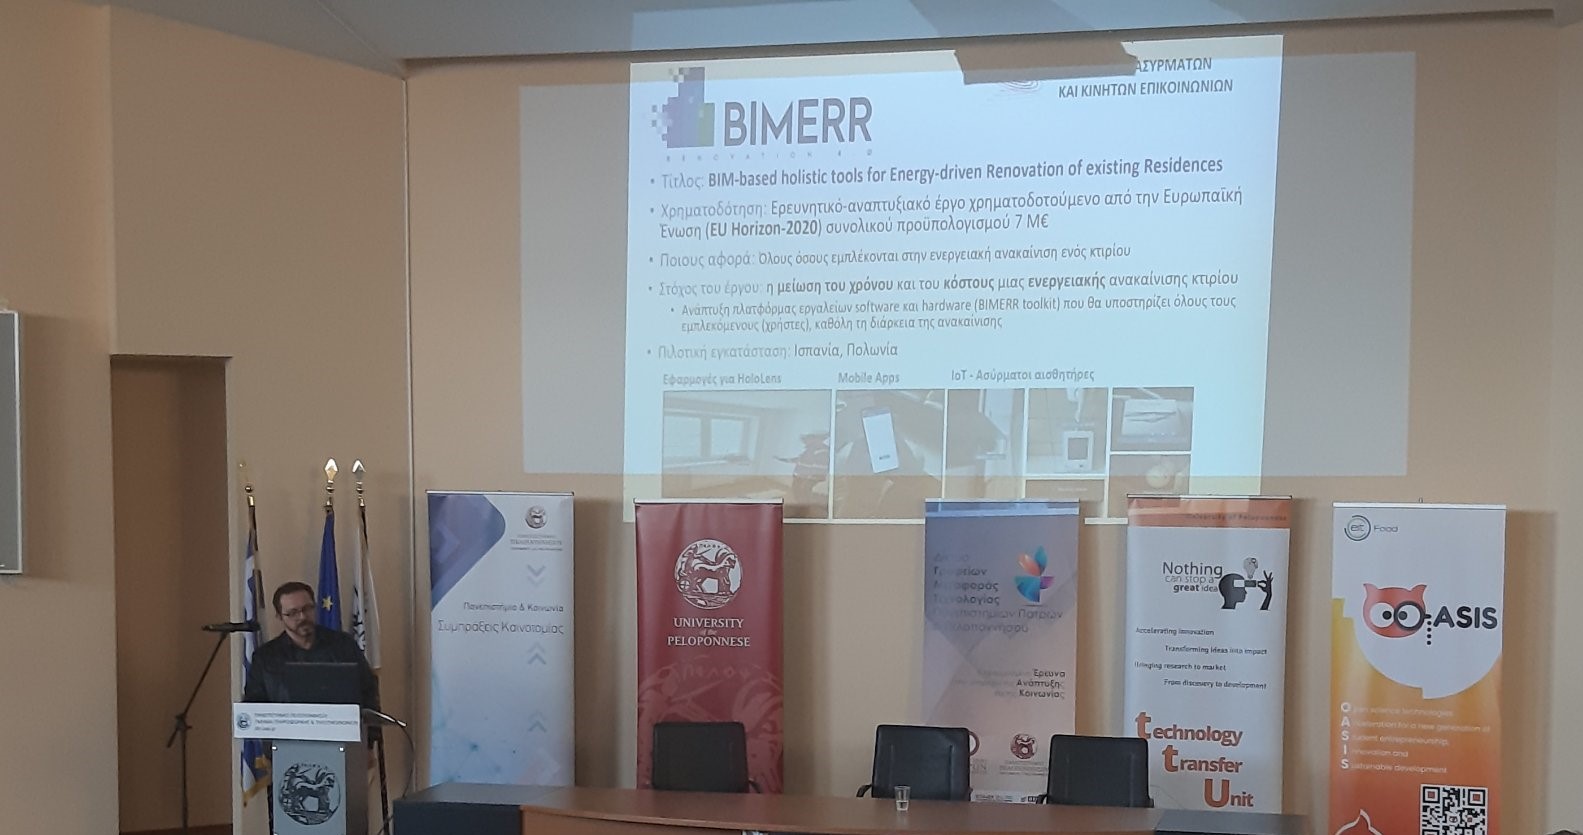 George Tsoulos presenting the BIMERR project